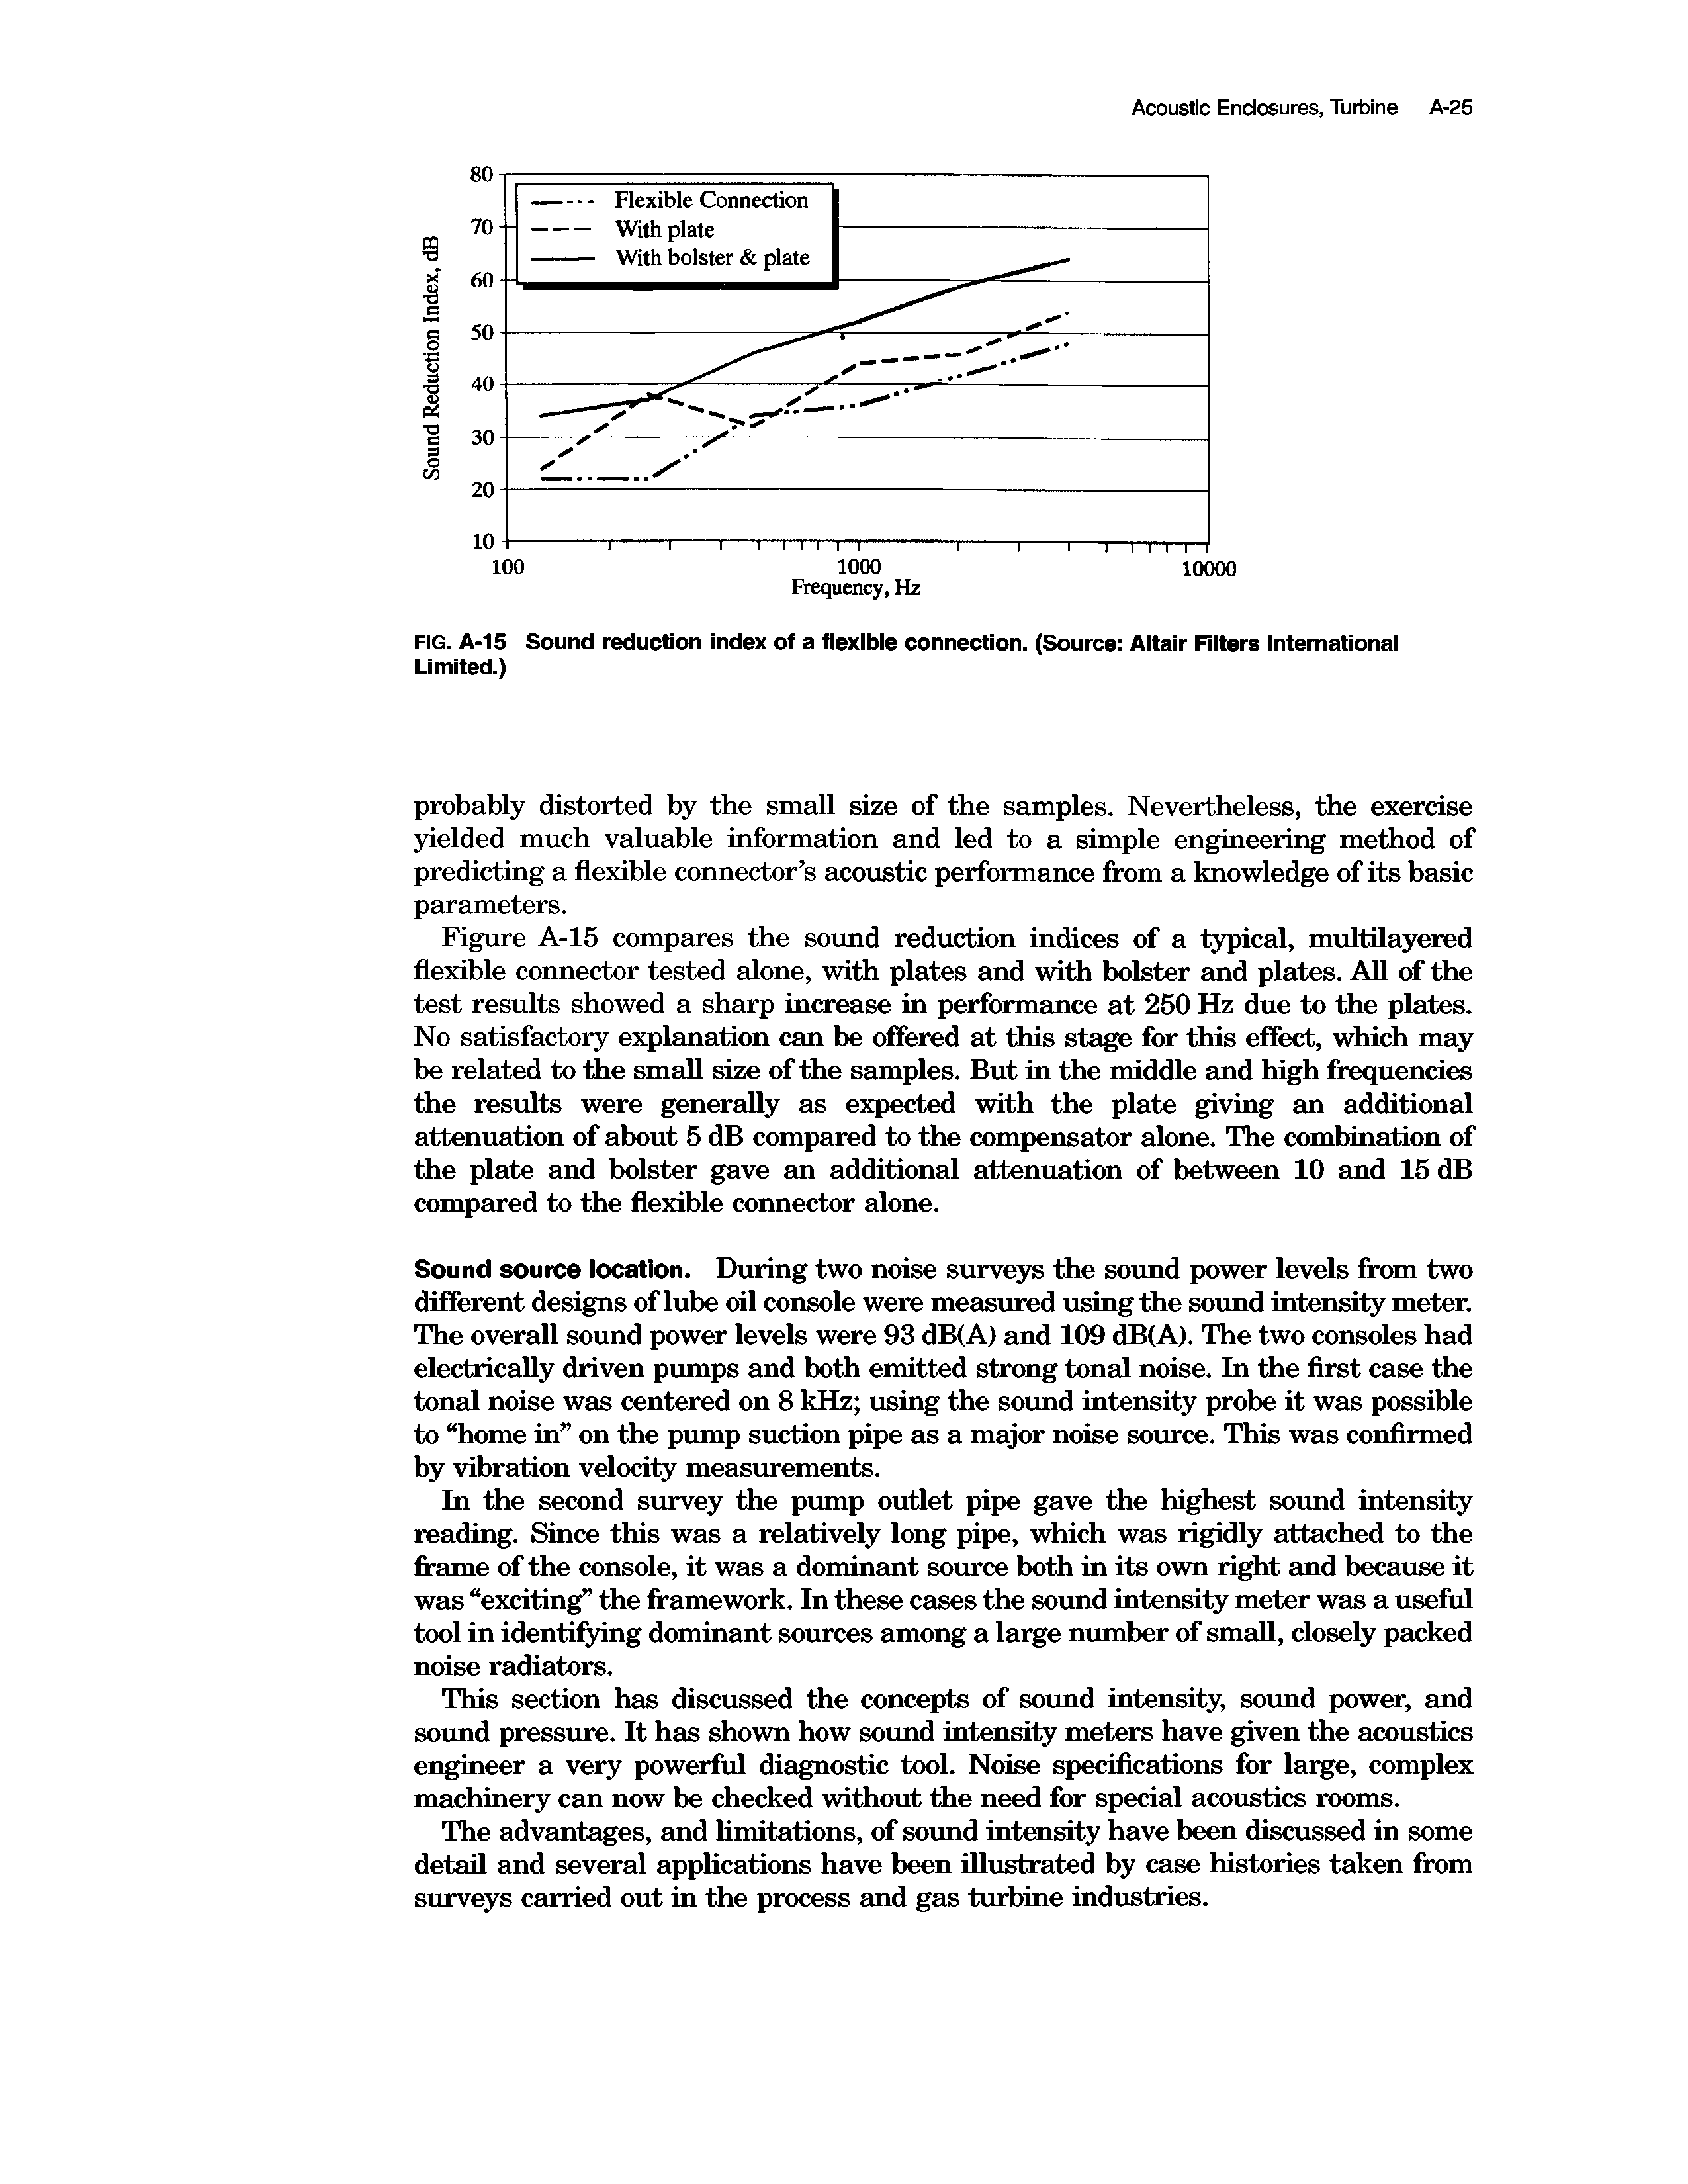 Figure A-15 compares the soimd reduction indices of a typical, multilayered flexible connector tested alone, with plates and with bolster and plates. All of the test results showed a sharp increase in performance at 250 Hz due to the plates. No satisfactory explanation can be offered at this stage for this effect, which may be related to the small size of the samples. But in the middle and high frequencies the results were generally as expected with the plate giving an additional attenuation of about 5 dB compared to the compensator alone. The combination of the plate and bolster gave an additional attenuation of between 10 and 15 dB compared to the flexible connector alone.